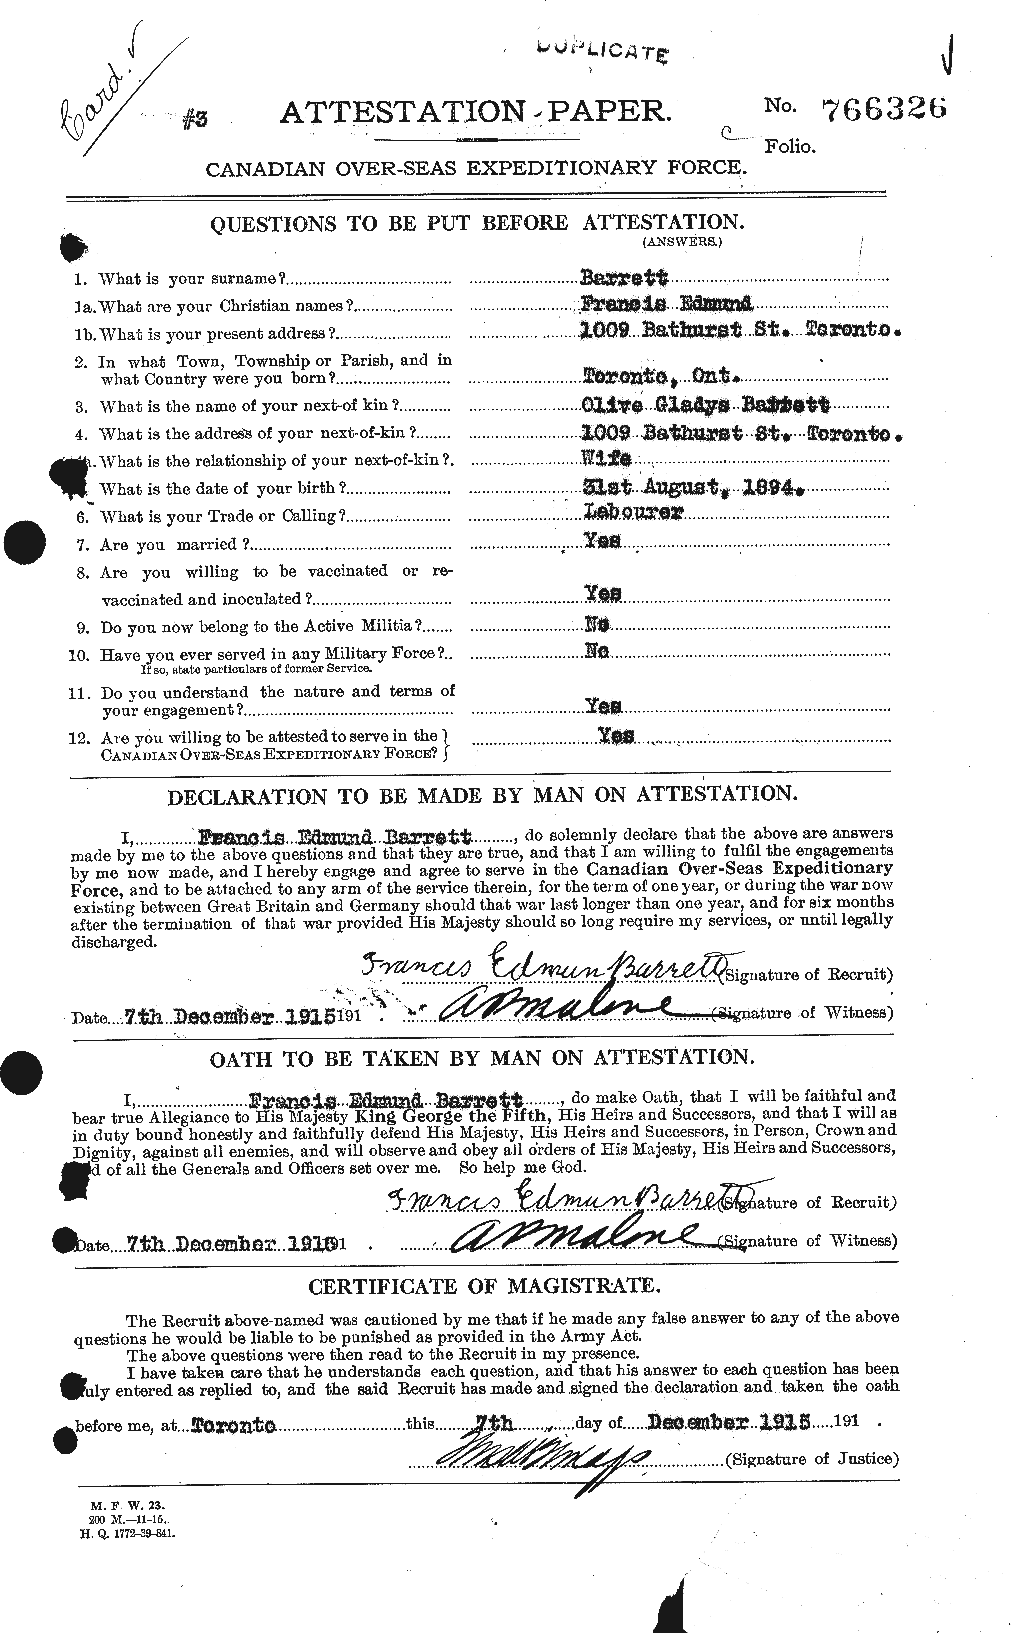 Personnel Records of the First World War - CEF 220337a